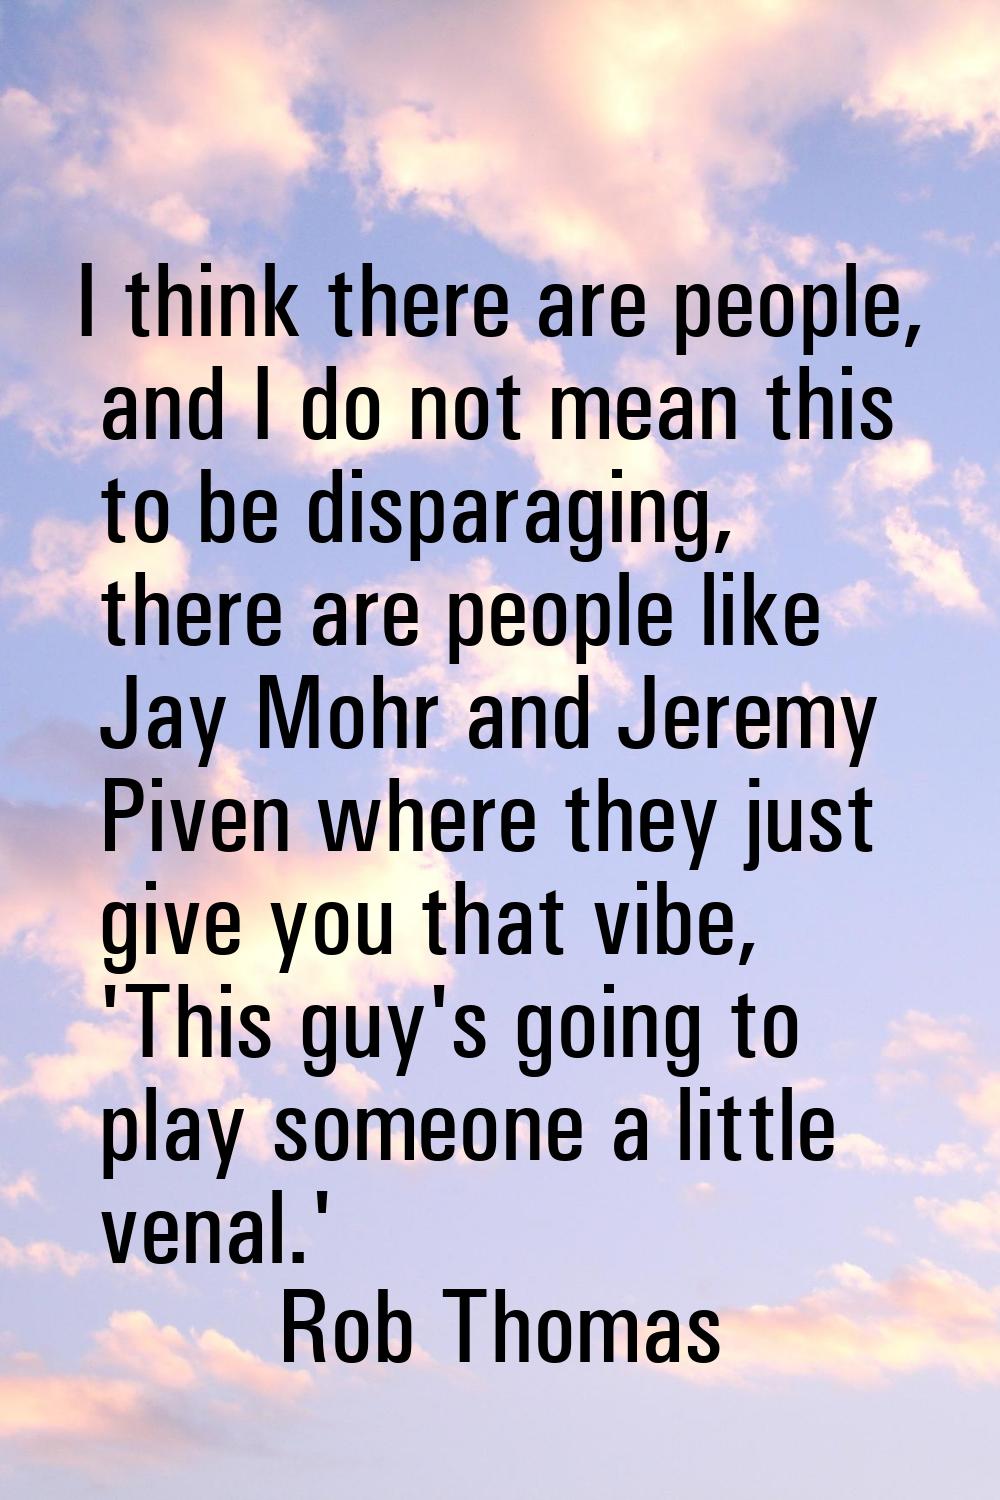 I think there are people, and I do not mean this to be disparaging, there are people like Jay Mohr 